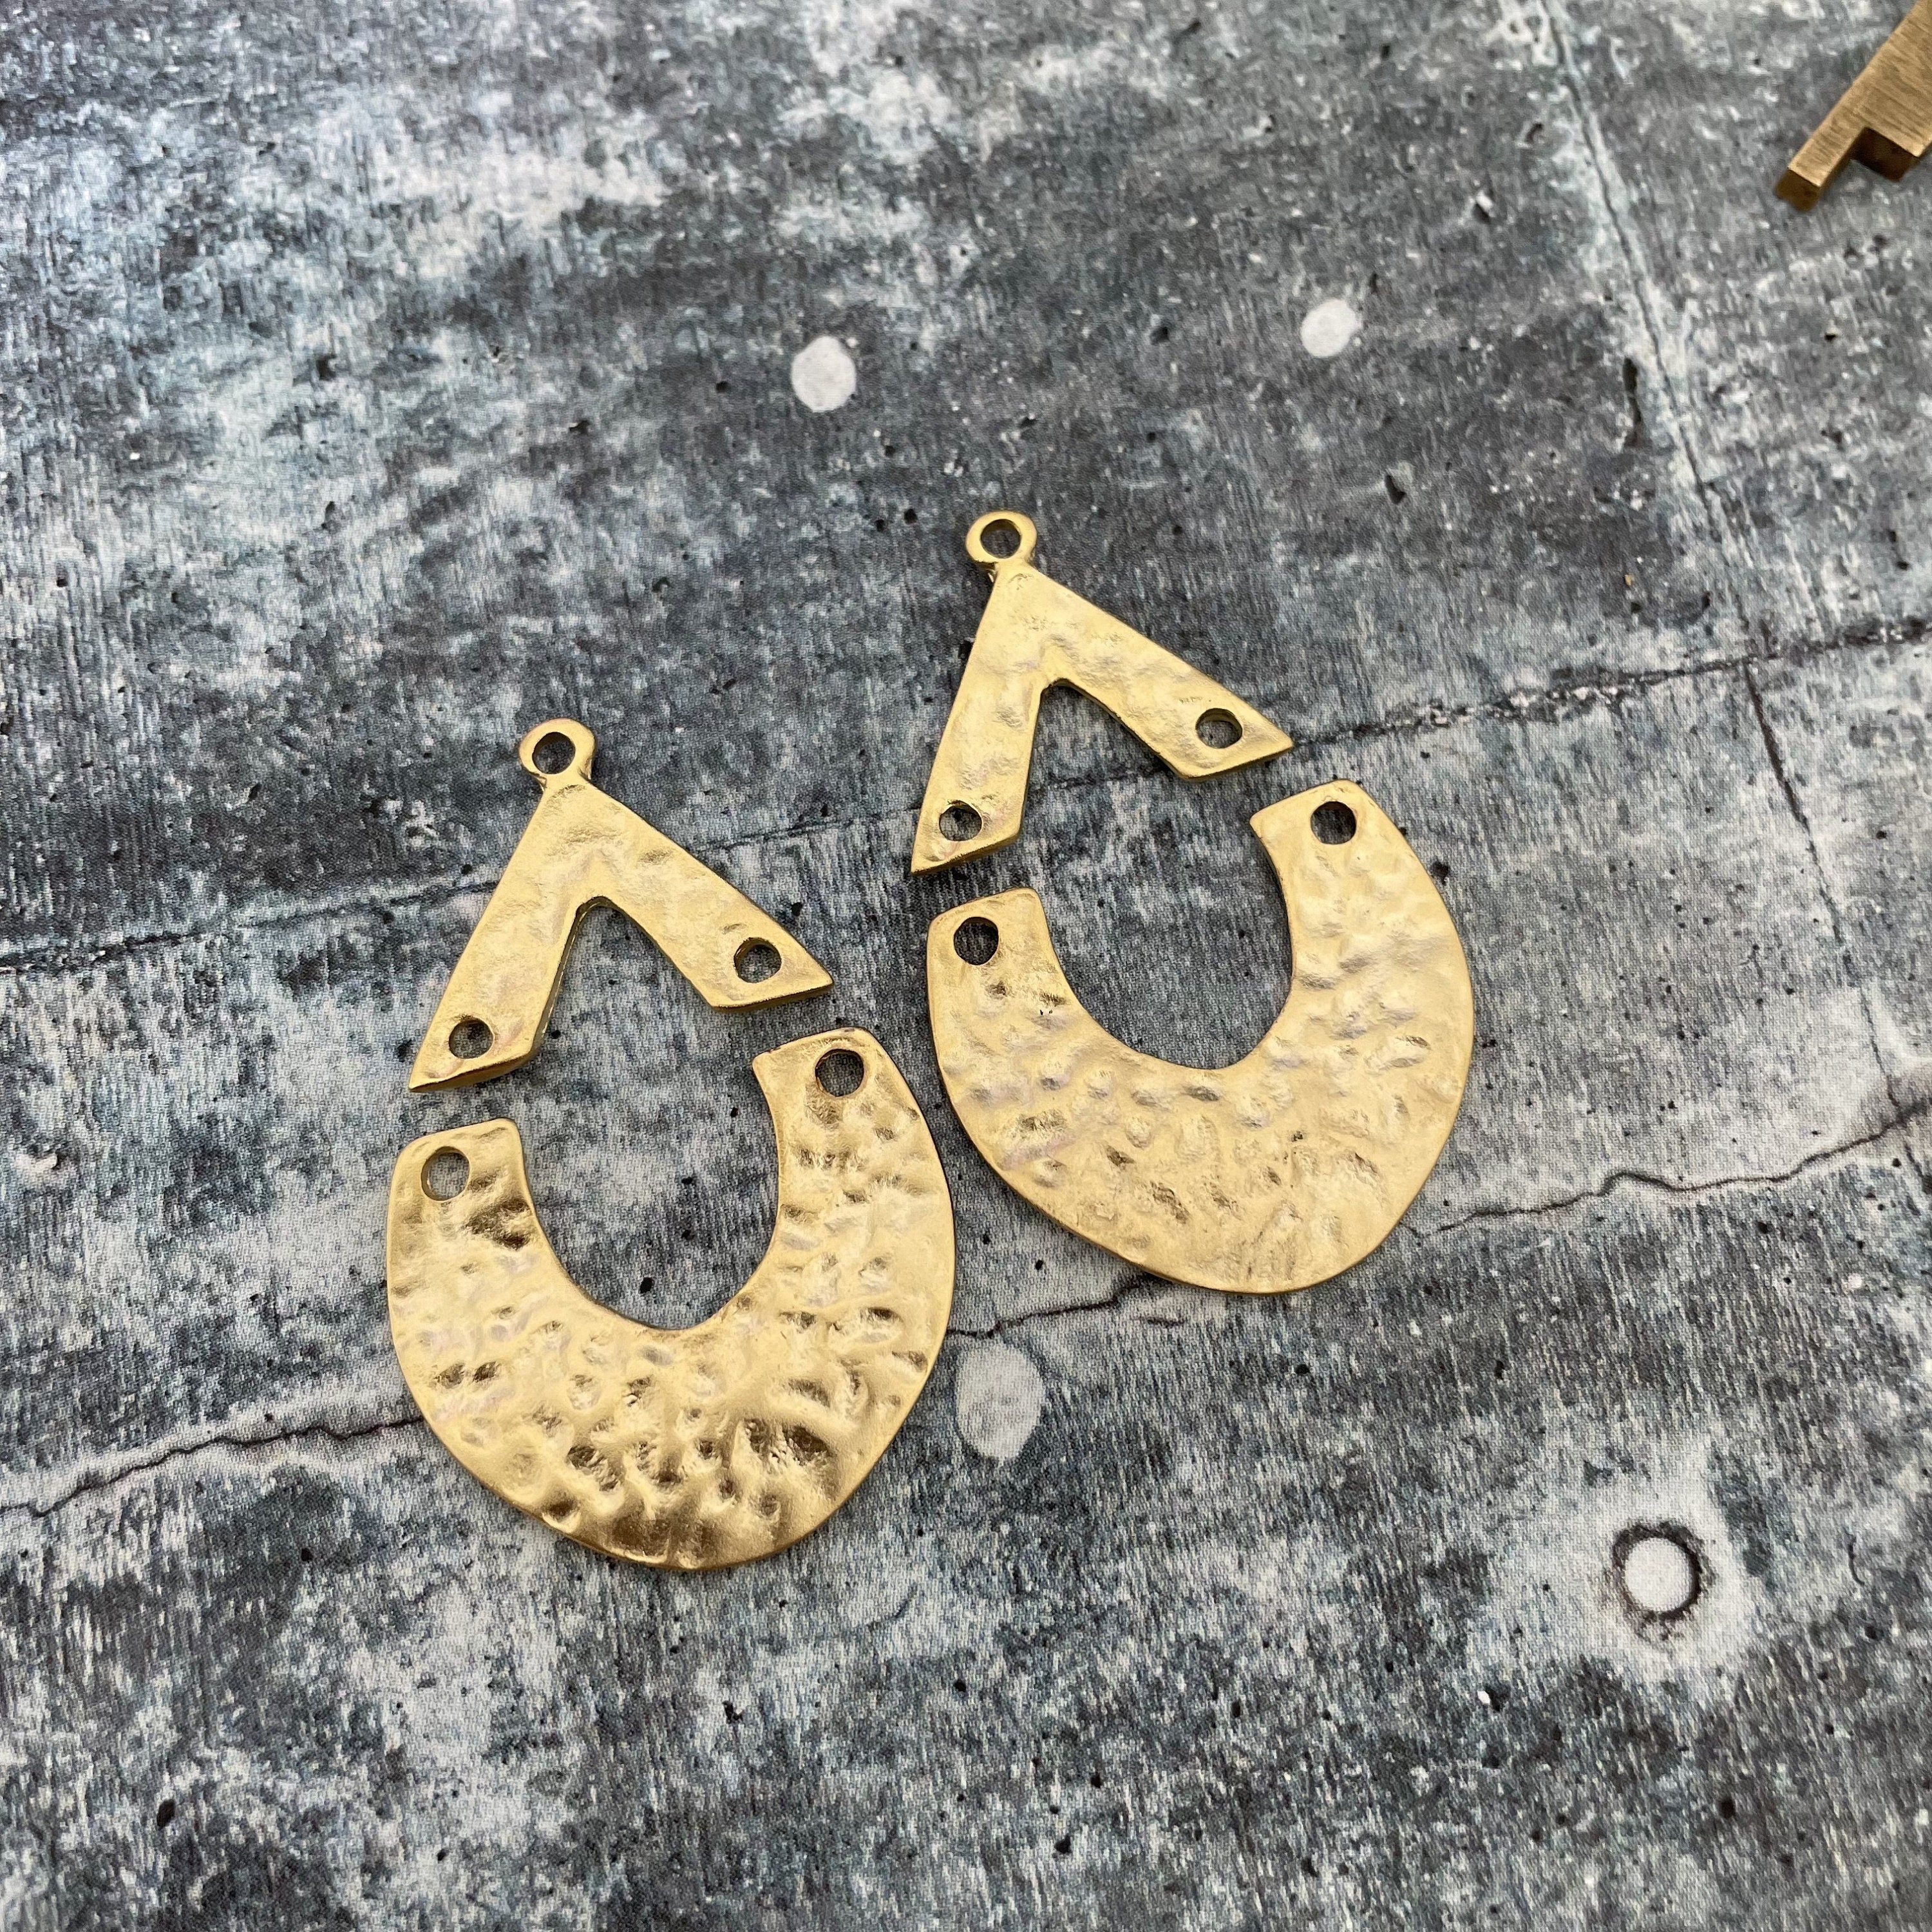 Accessorize in Style with Brass Earring Findings - Raw Brass Connectors and  Charms. 3106